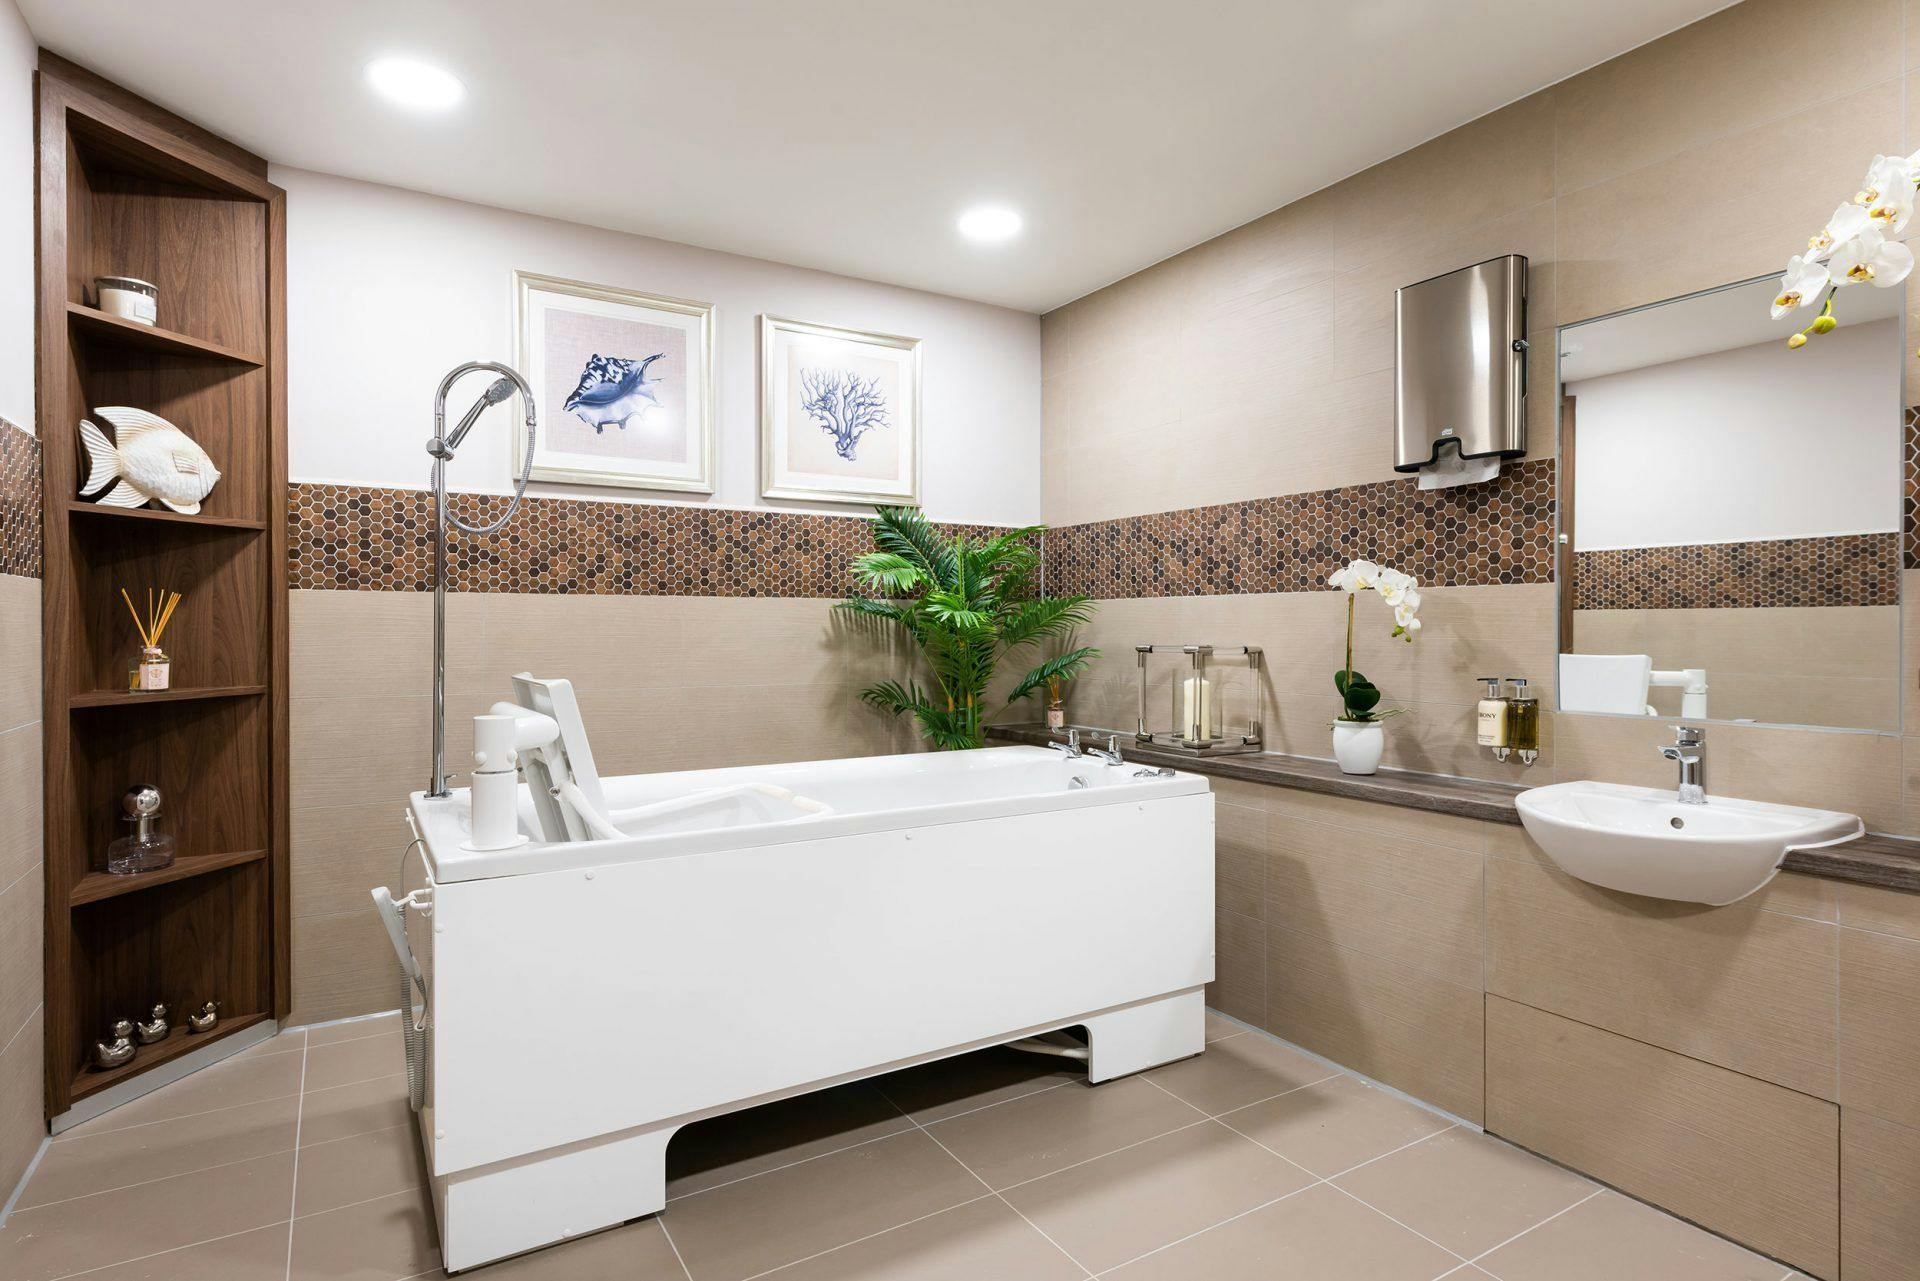 Bathroom of Lakeview Grange care home in Chichester, West Sussex